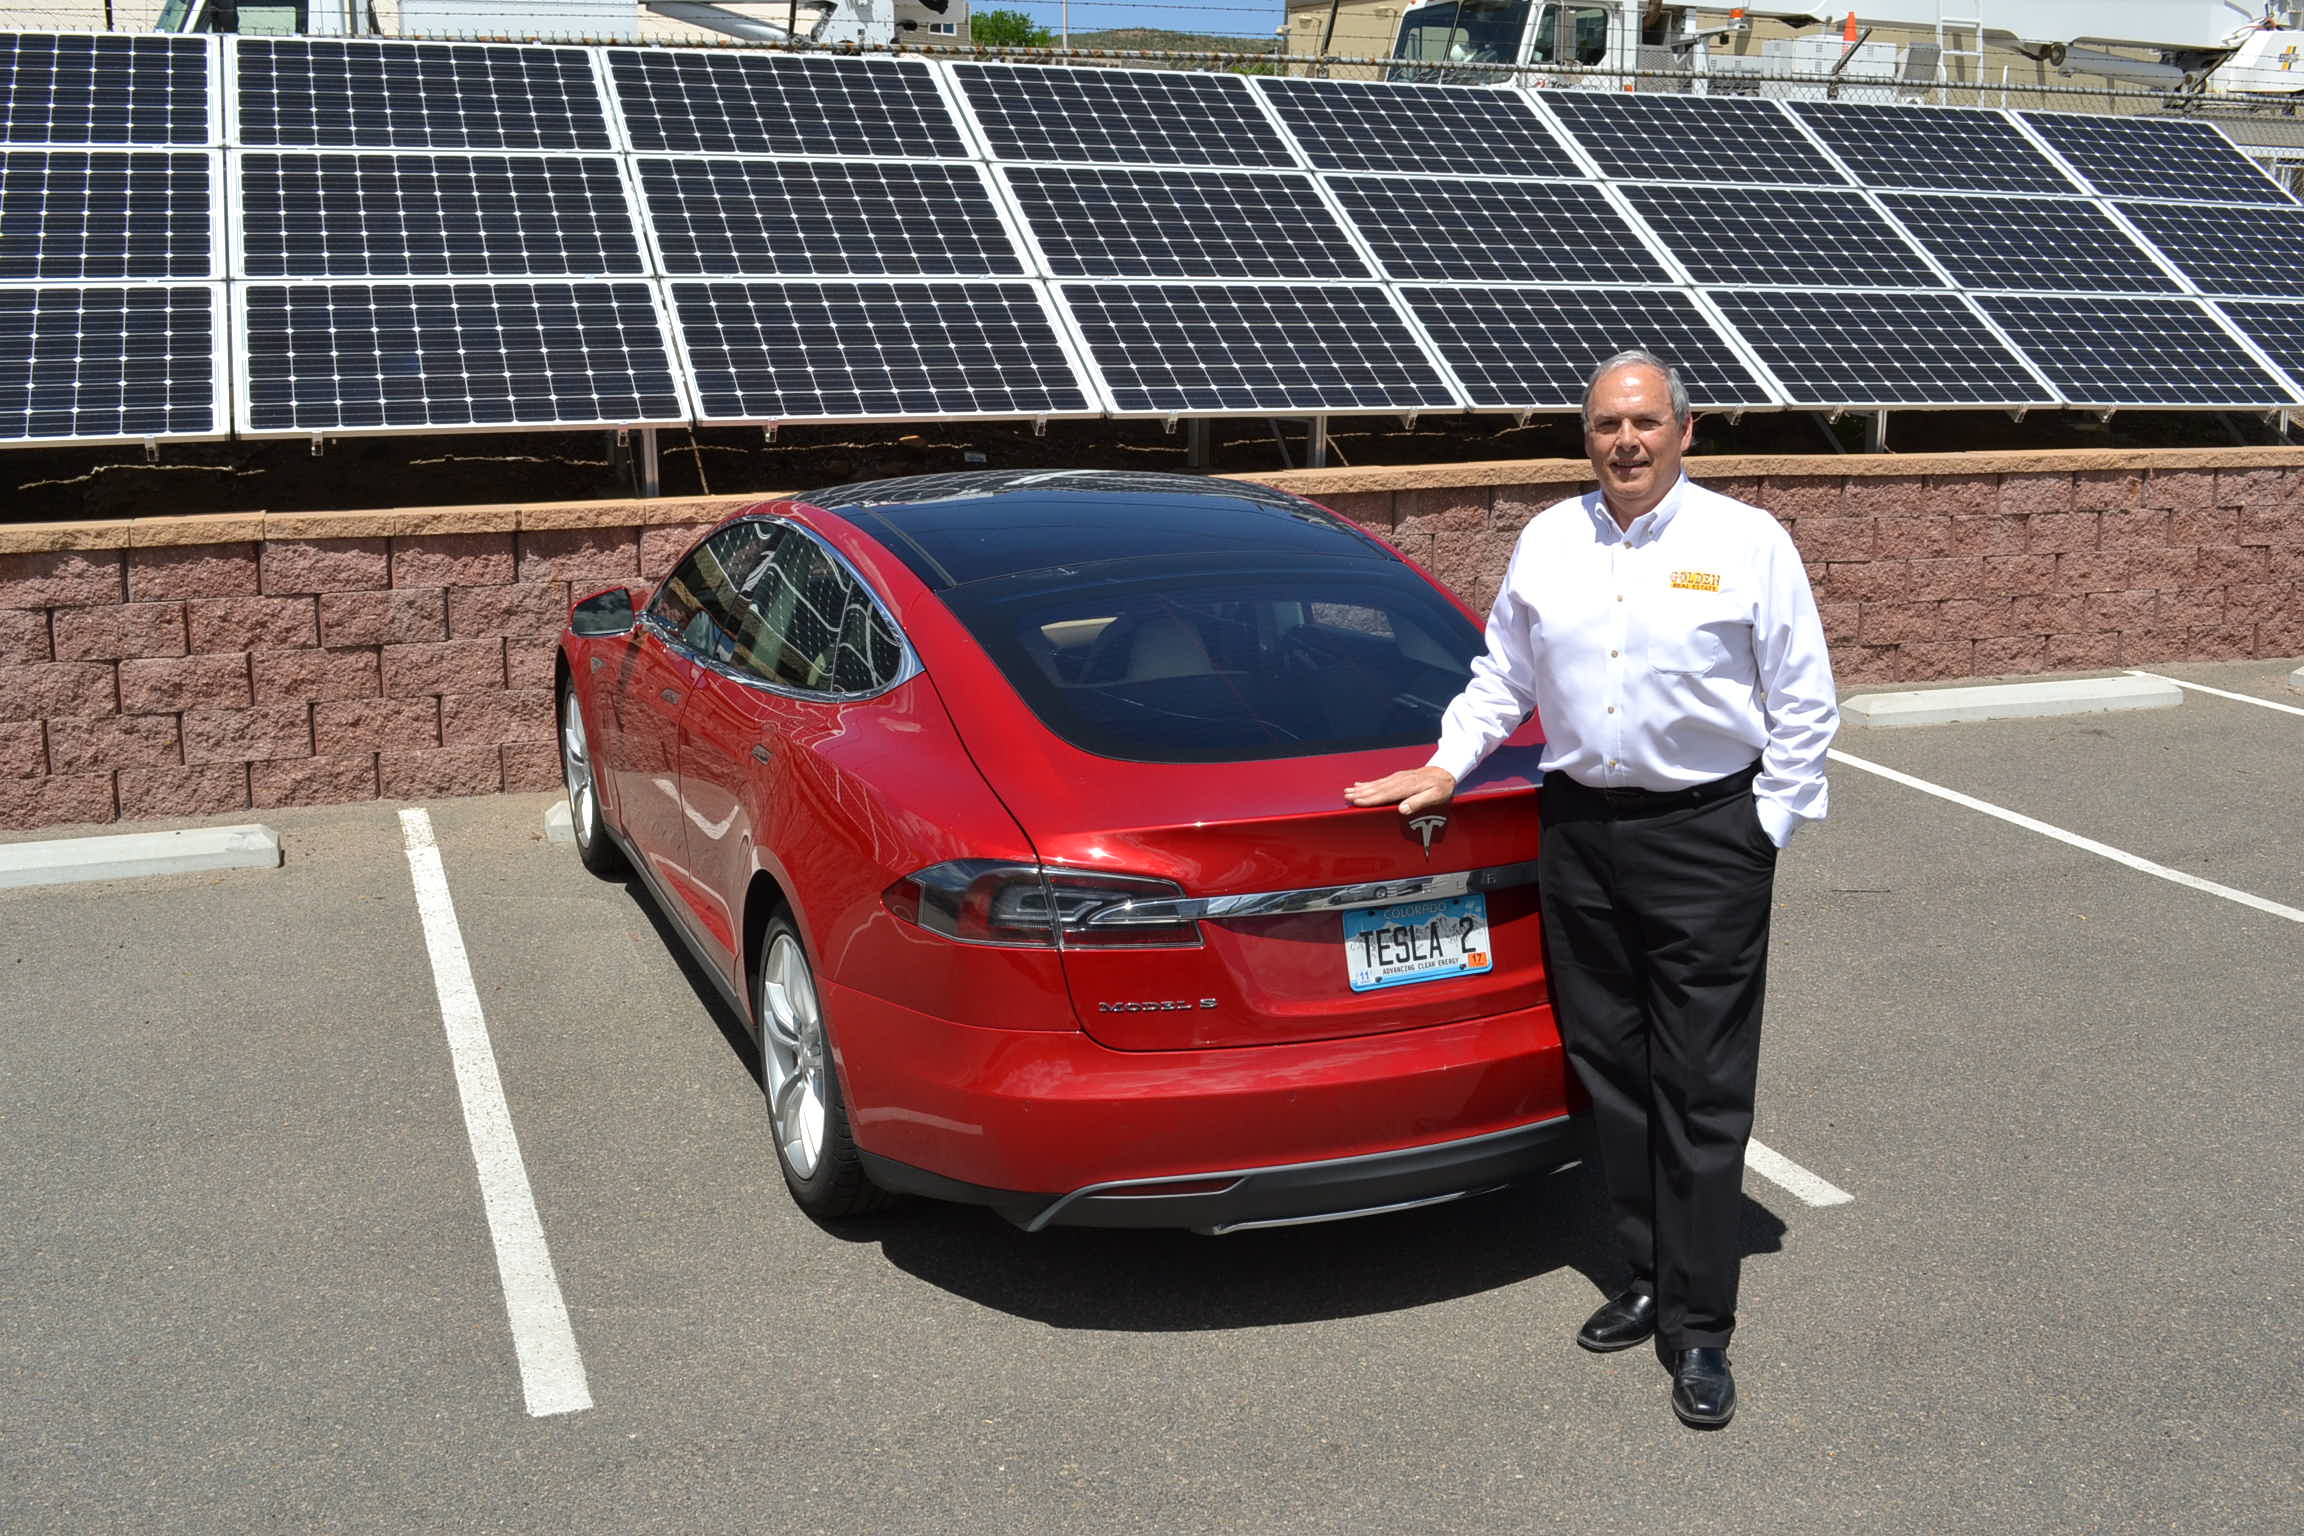 Jim Smith '69 with his electric car and solar panels.